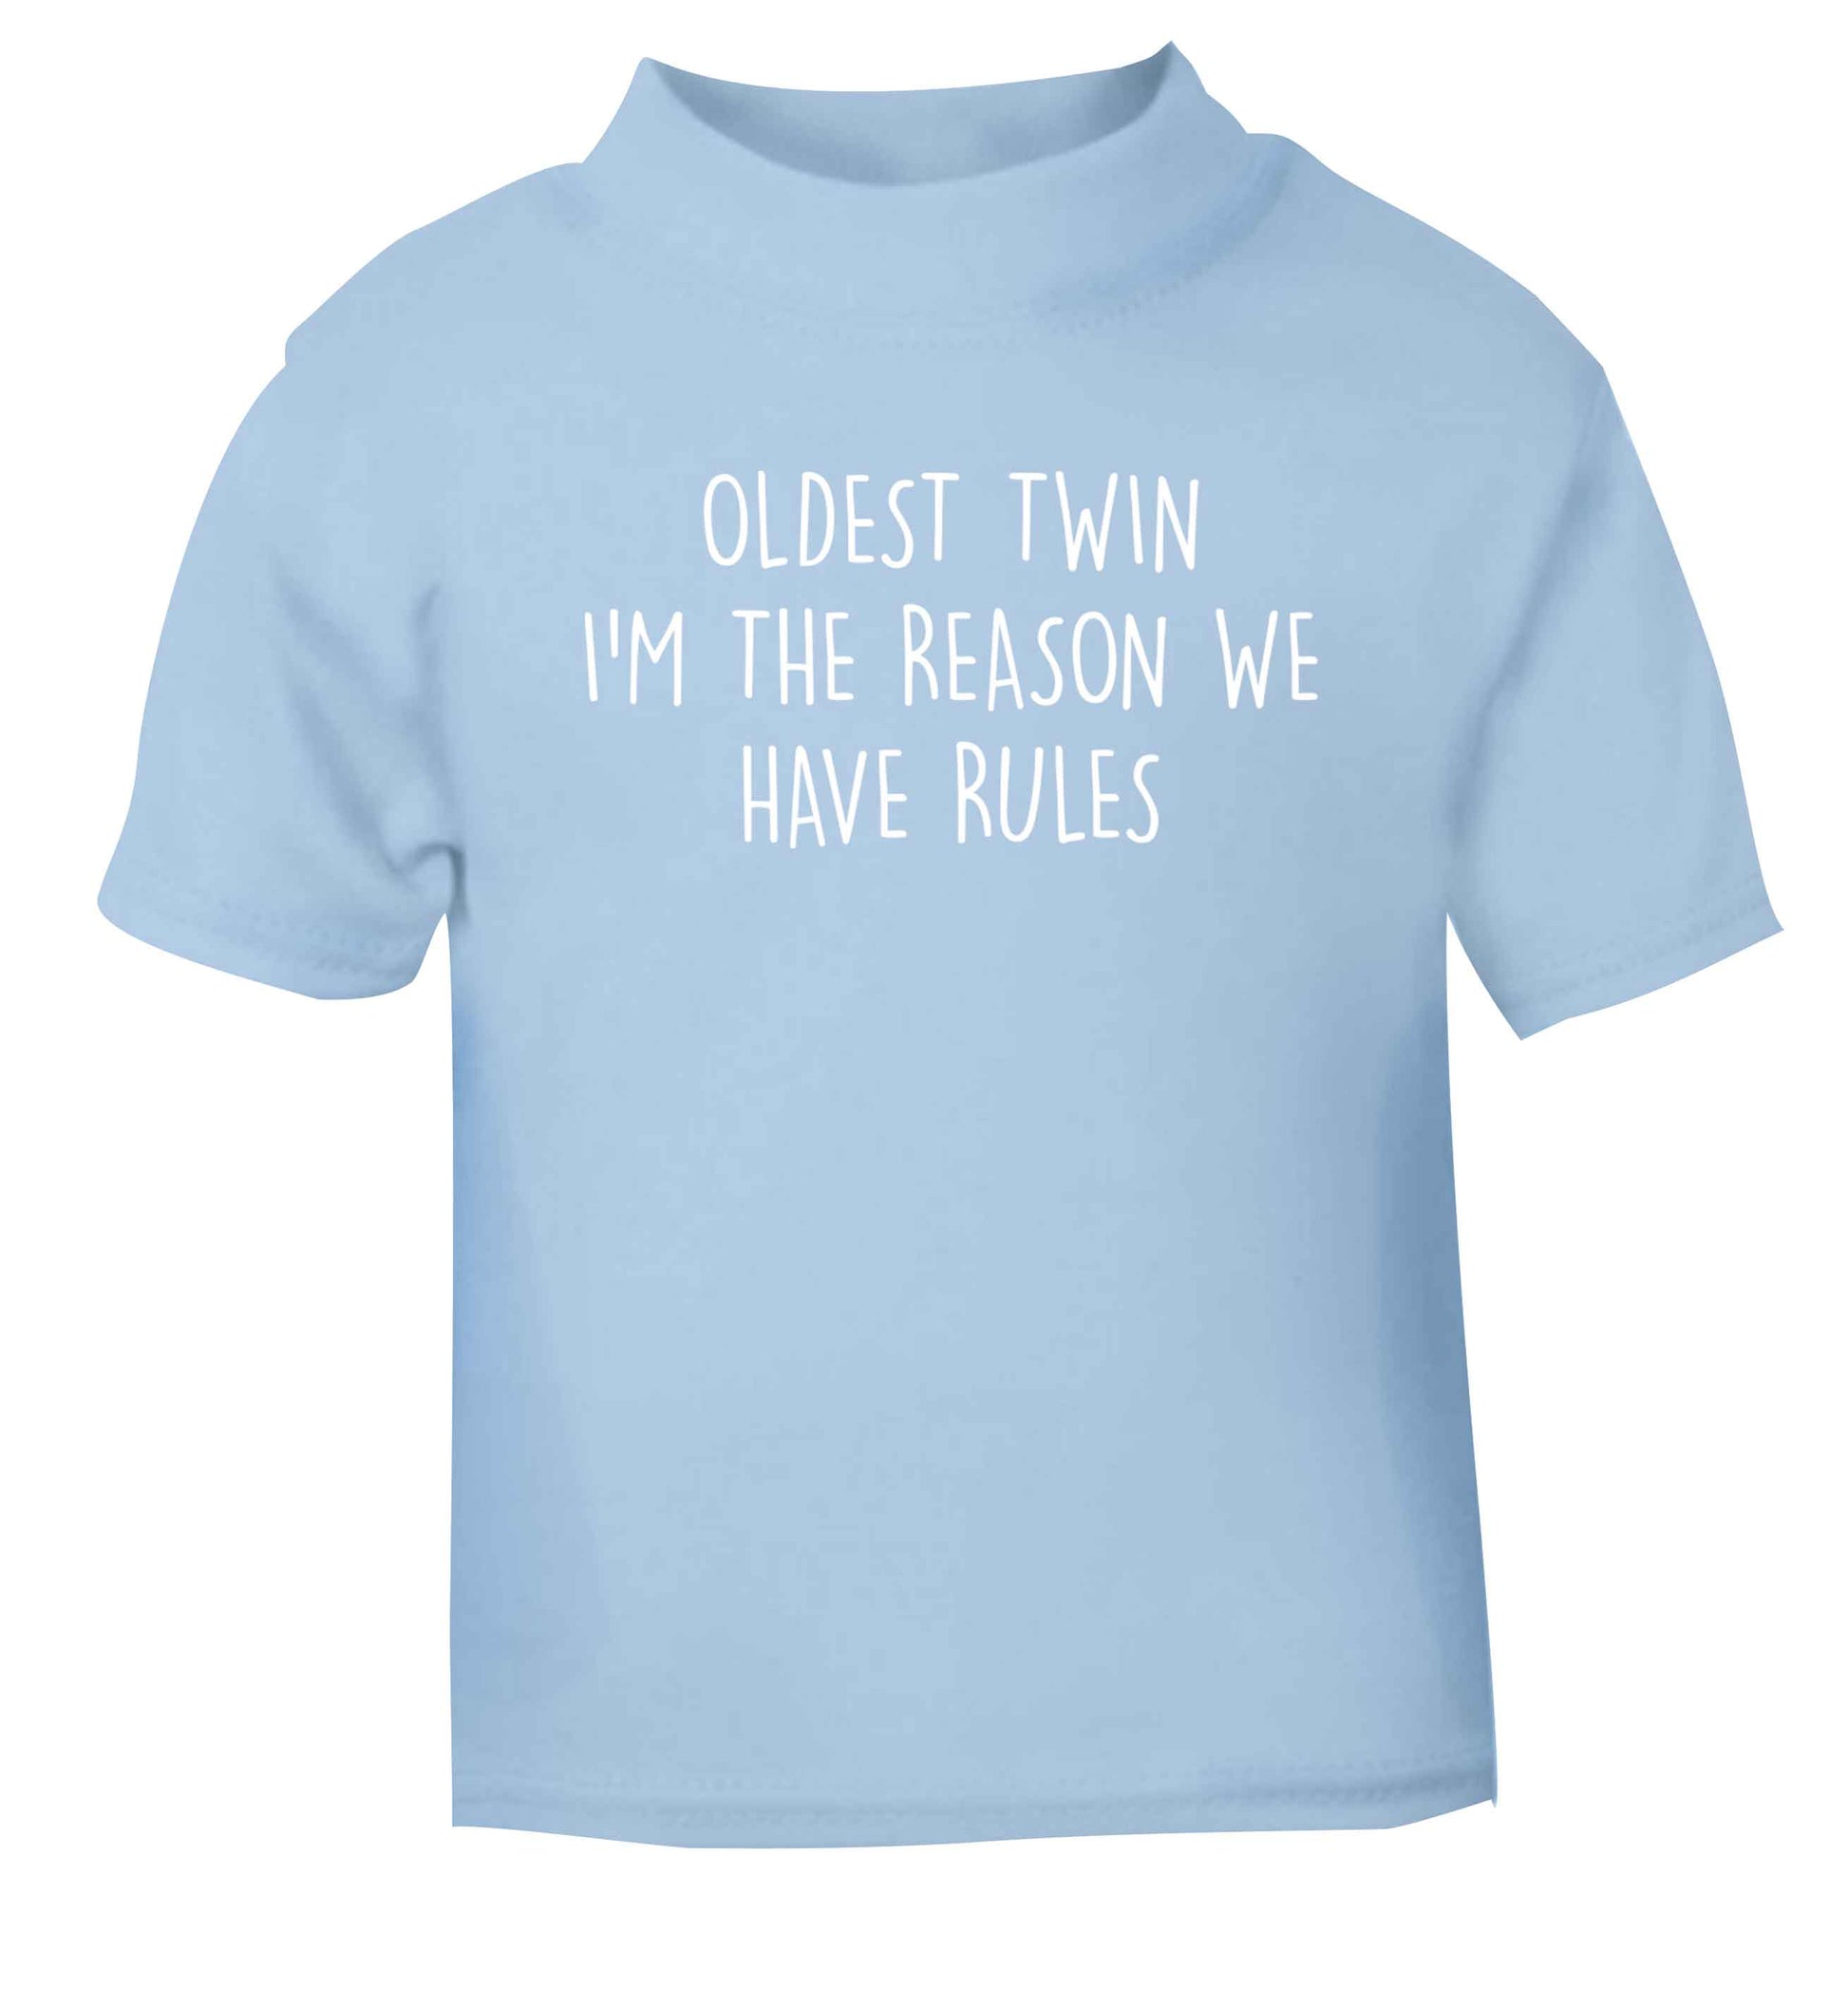 Oldest twin I'm the reason we have rules light blue baby toddler Tshirt 2 Years